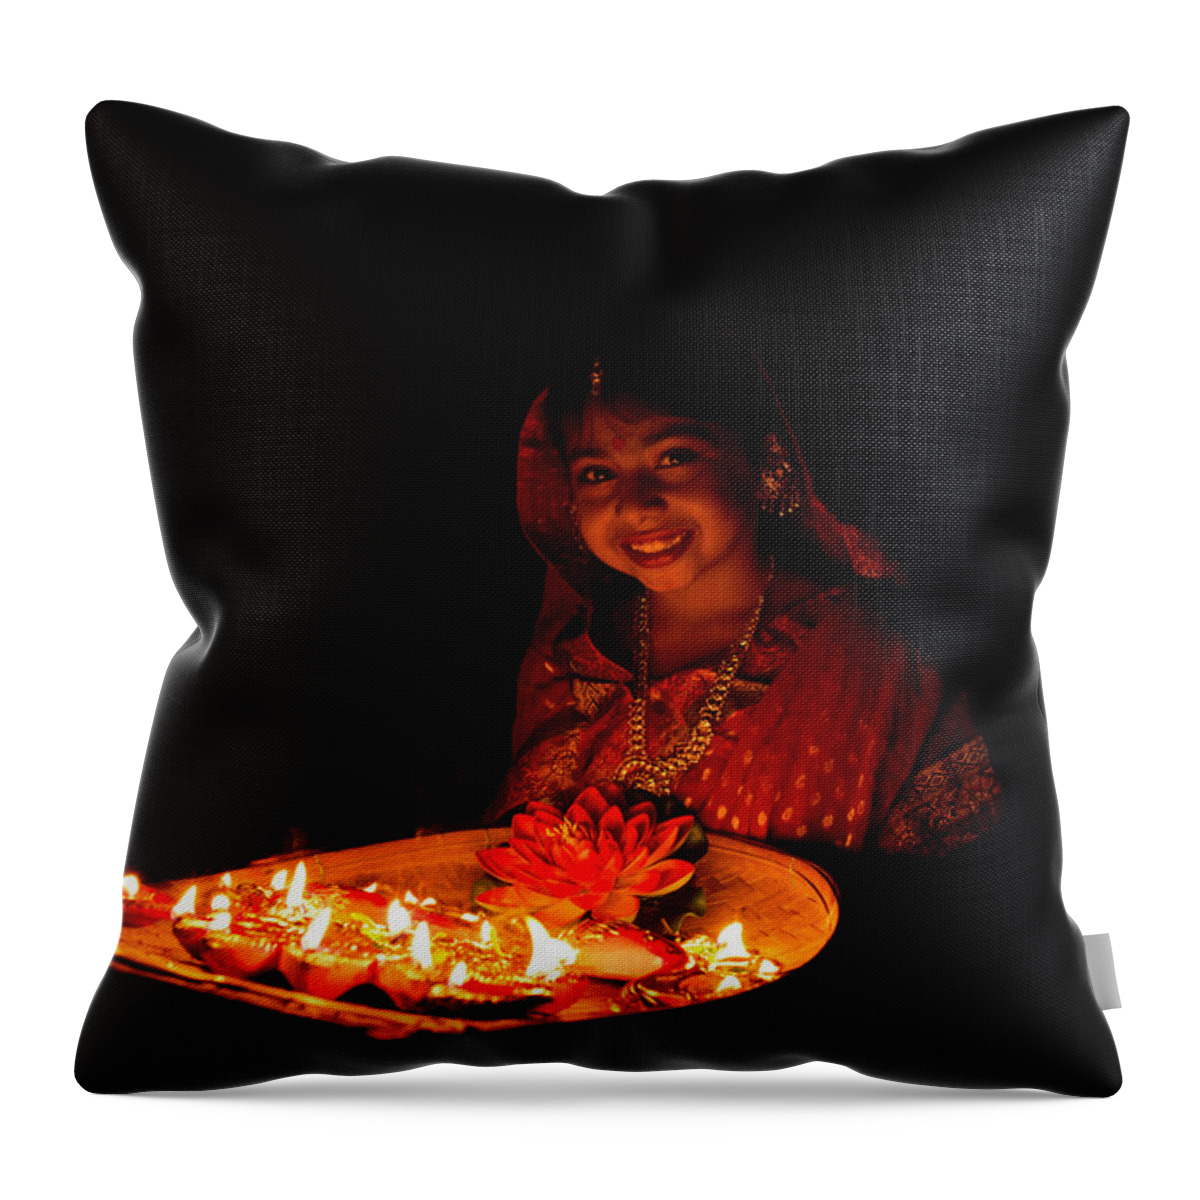 Hinduism Throw Pillow featuring the photograph Happy On Diwali by India Photography